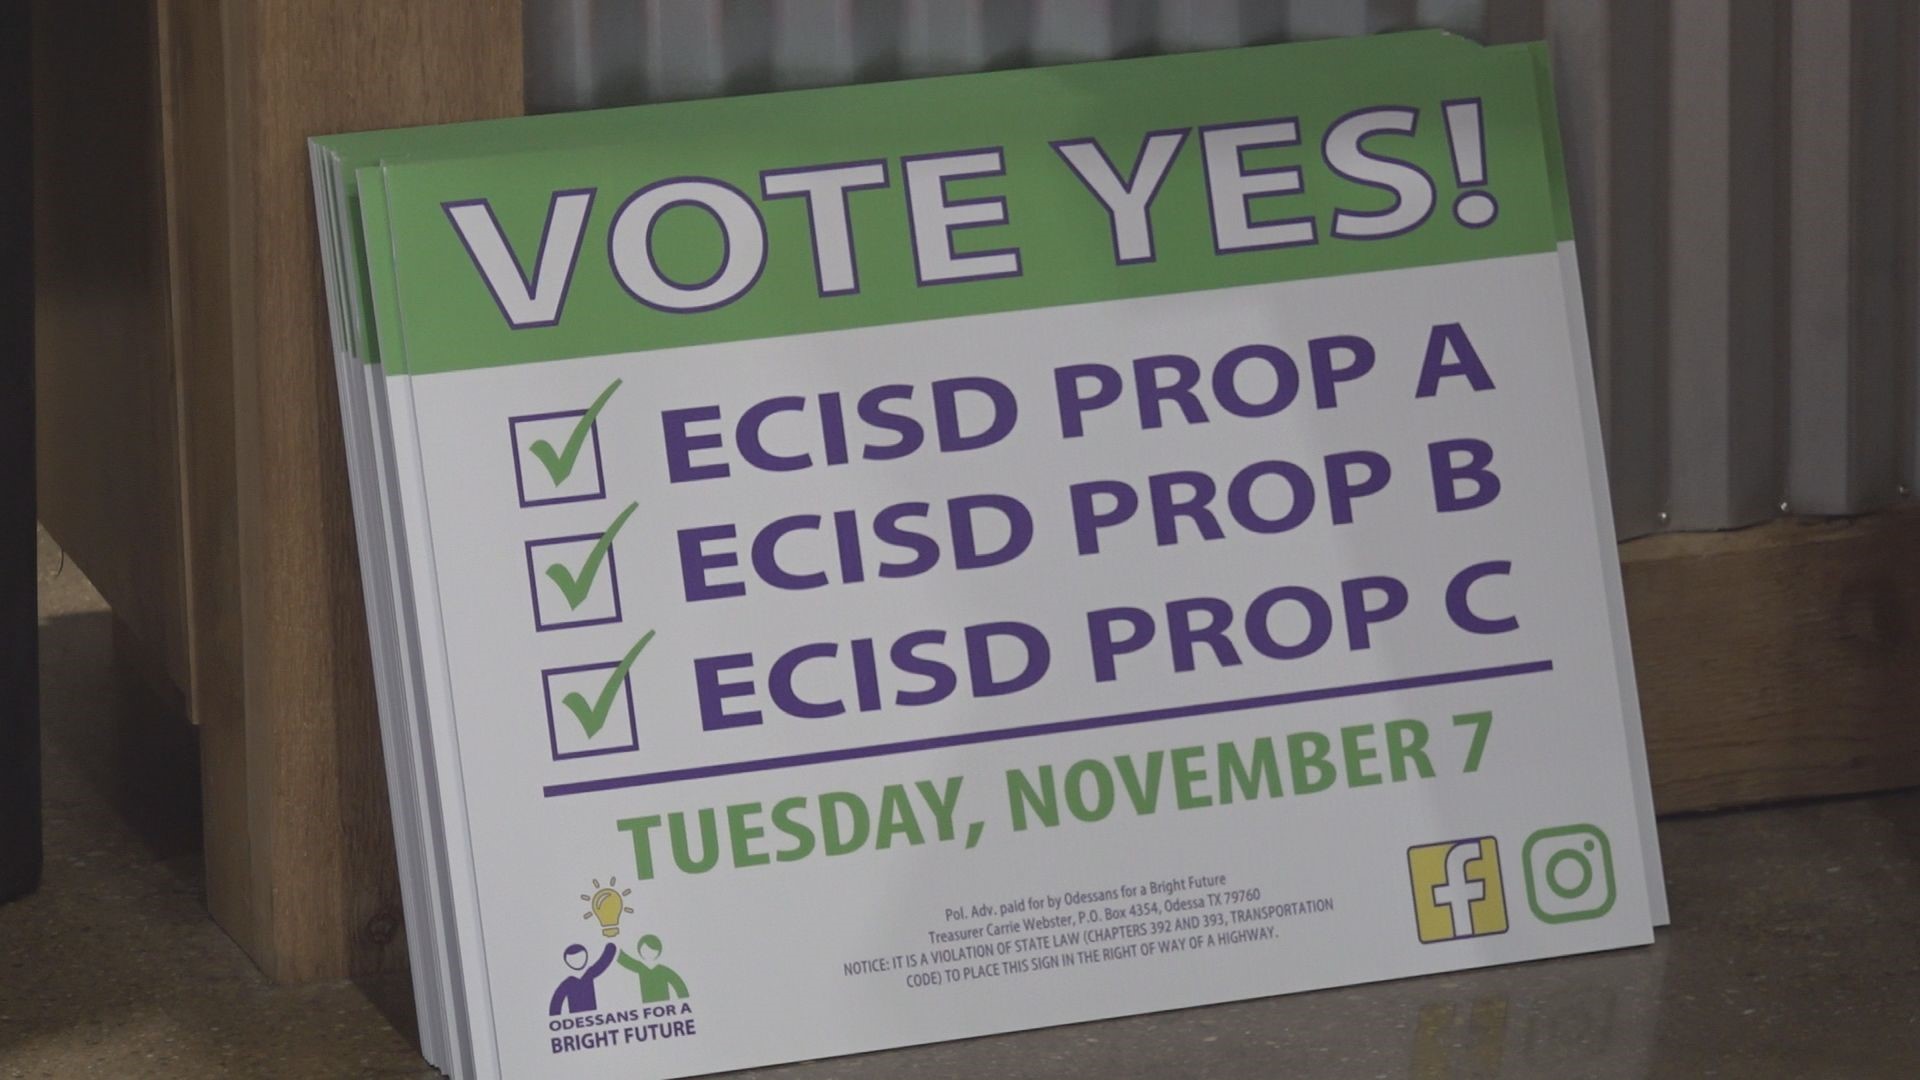 Local political action committee wants Ector County residents to vote yes.